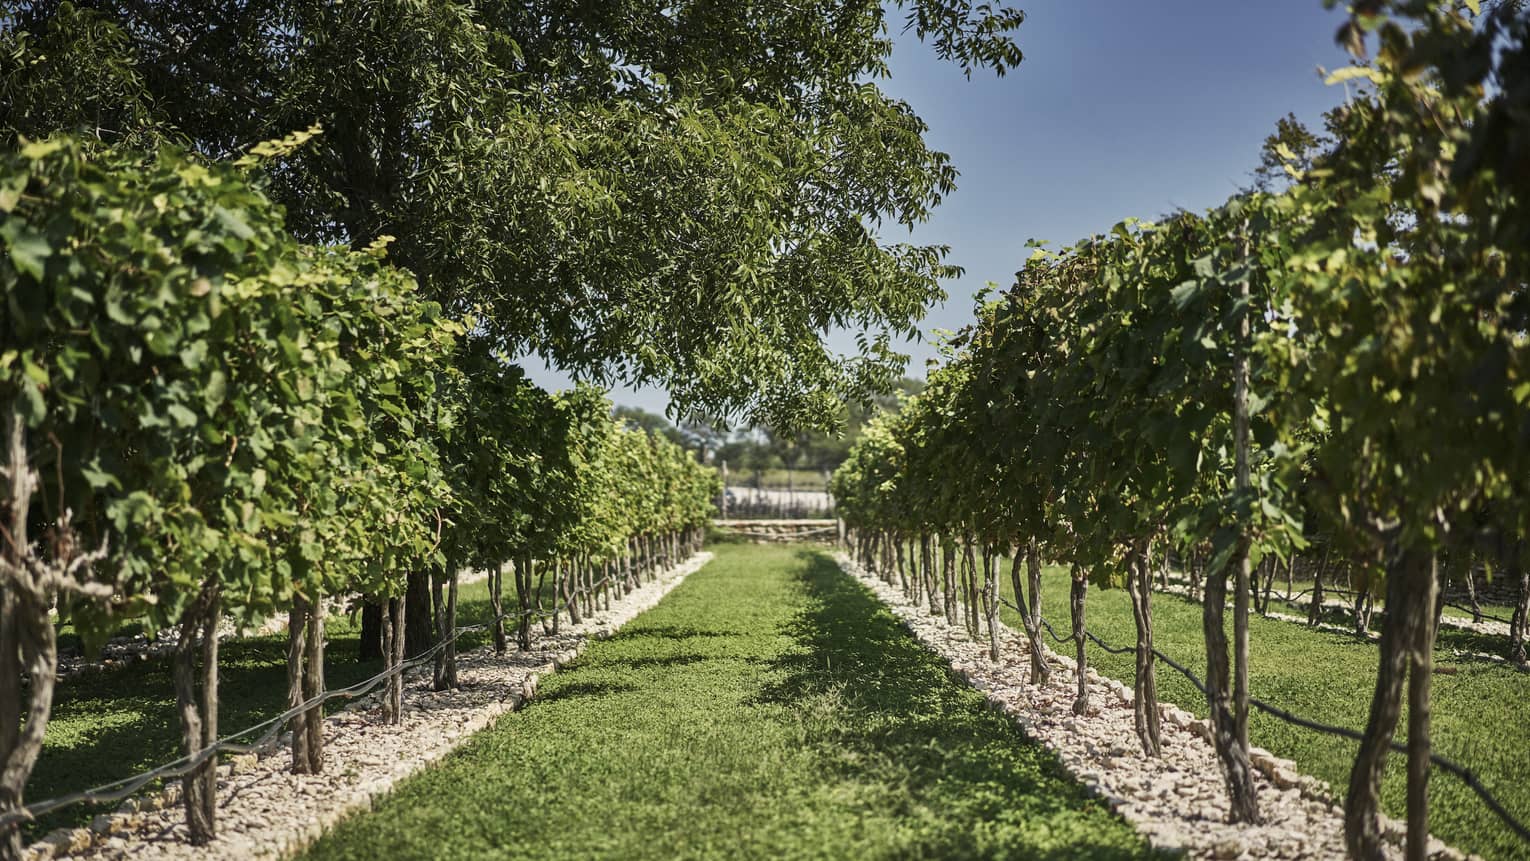 A vineyard with very green grass and green leaves, a blue sky can be seen through trees.